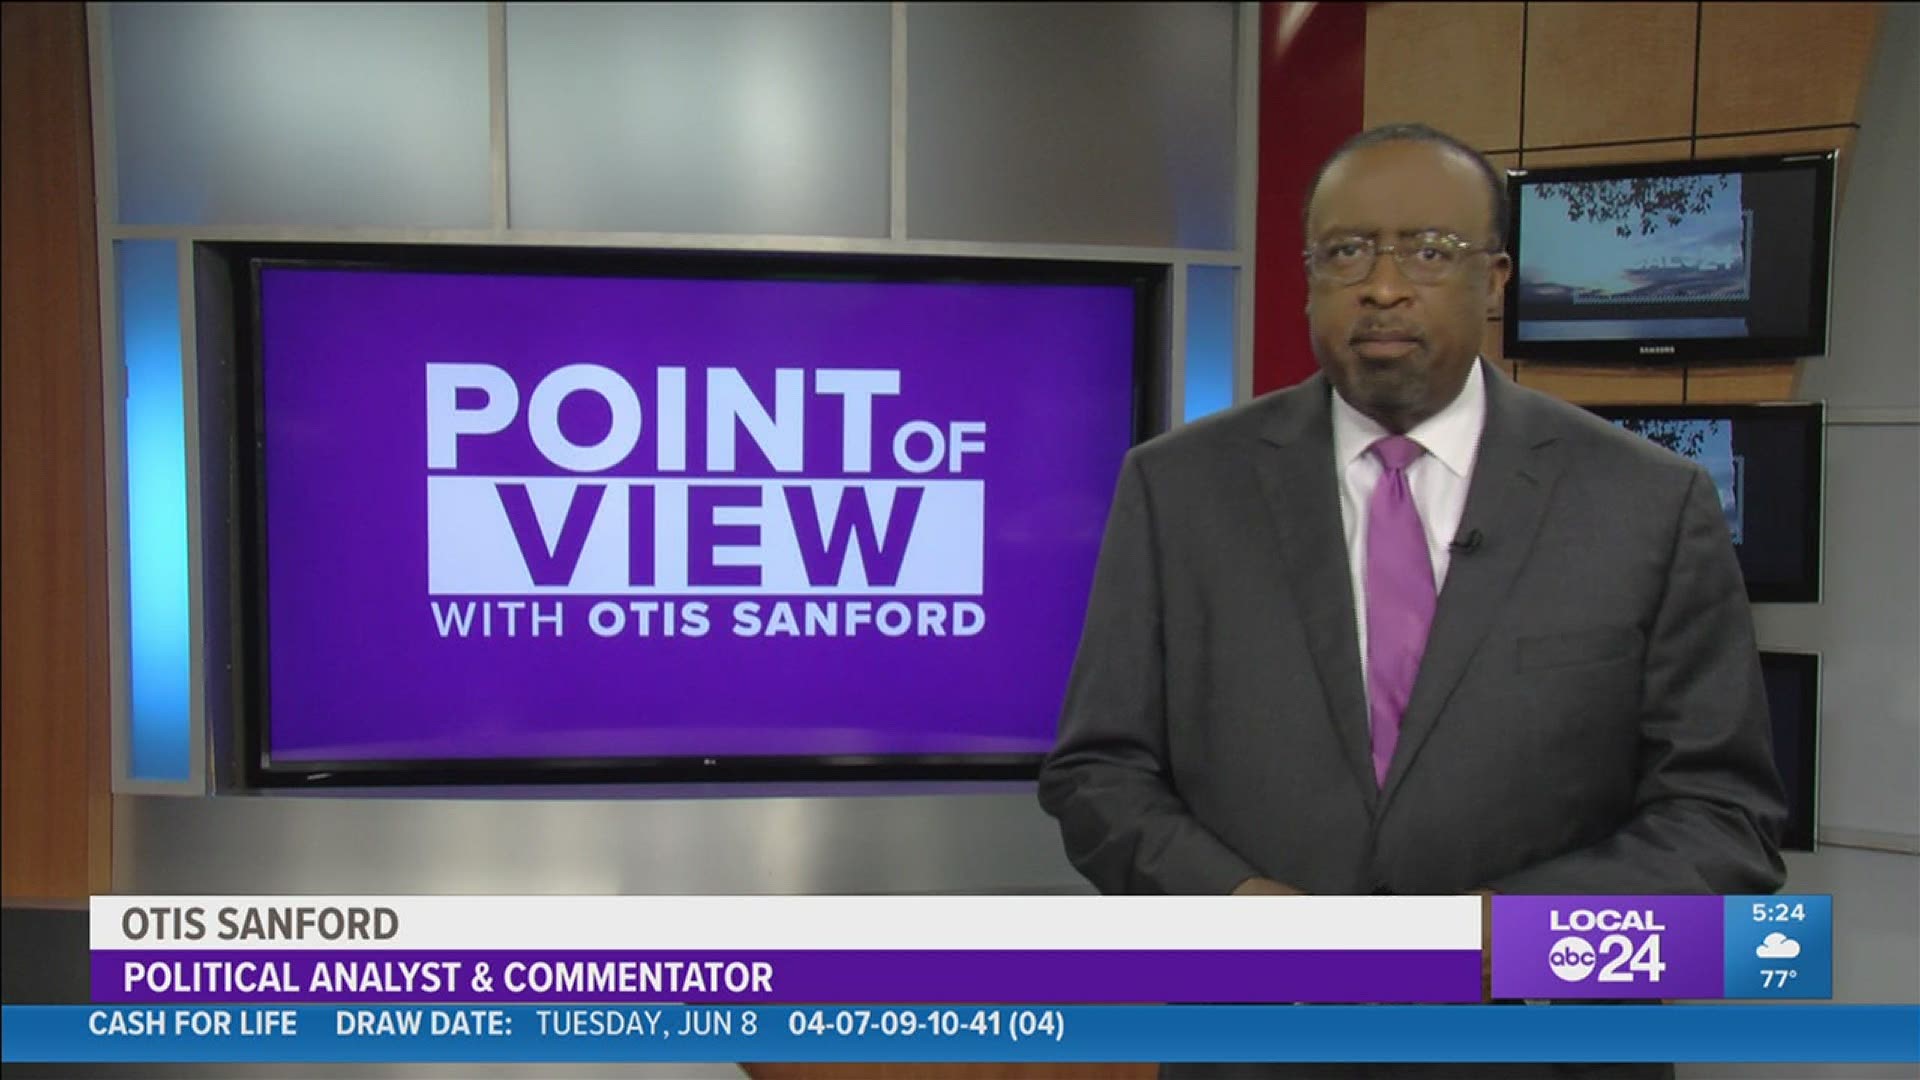 Local 24 News political analyst and commentator Otis Sanford shares his point of view on the investment in the Memphis Regional Megasite by the state.